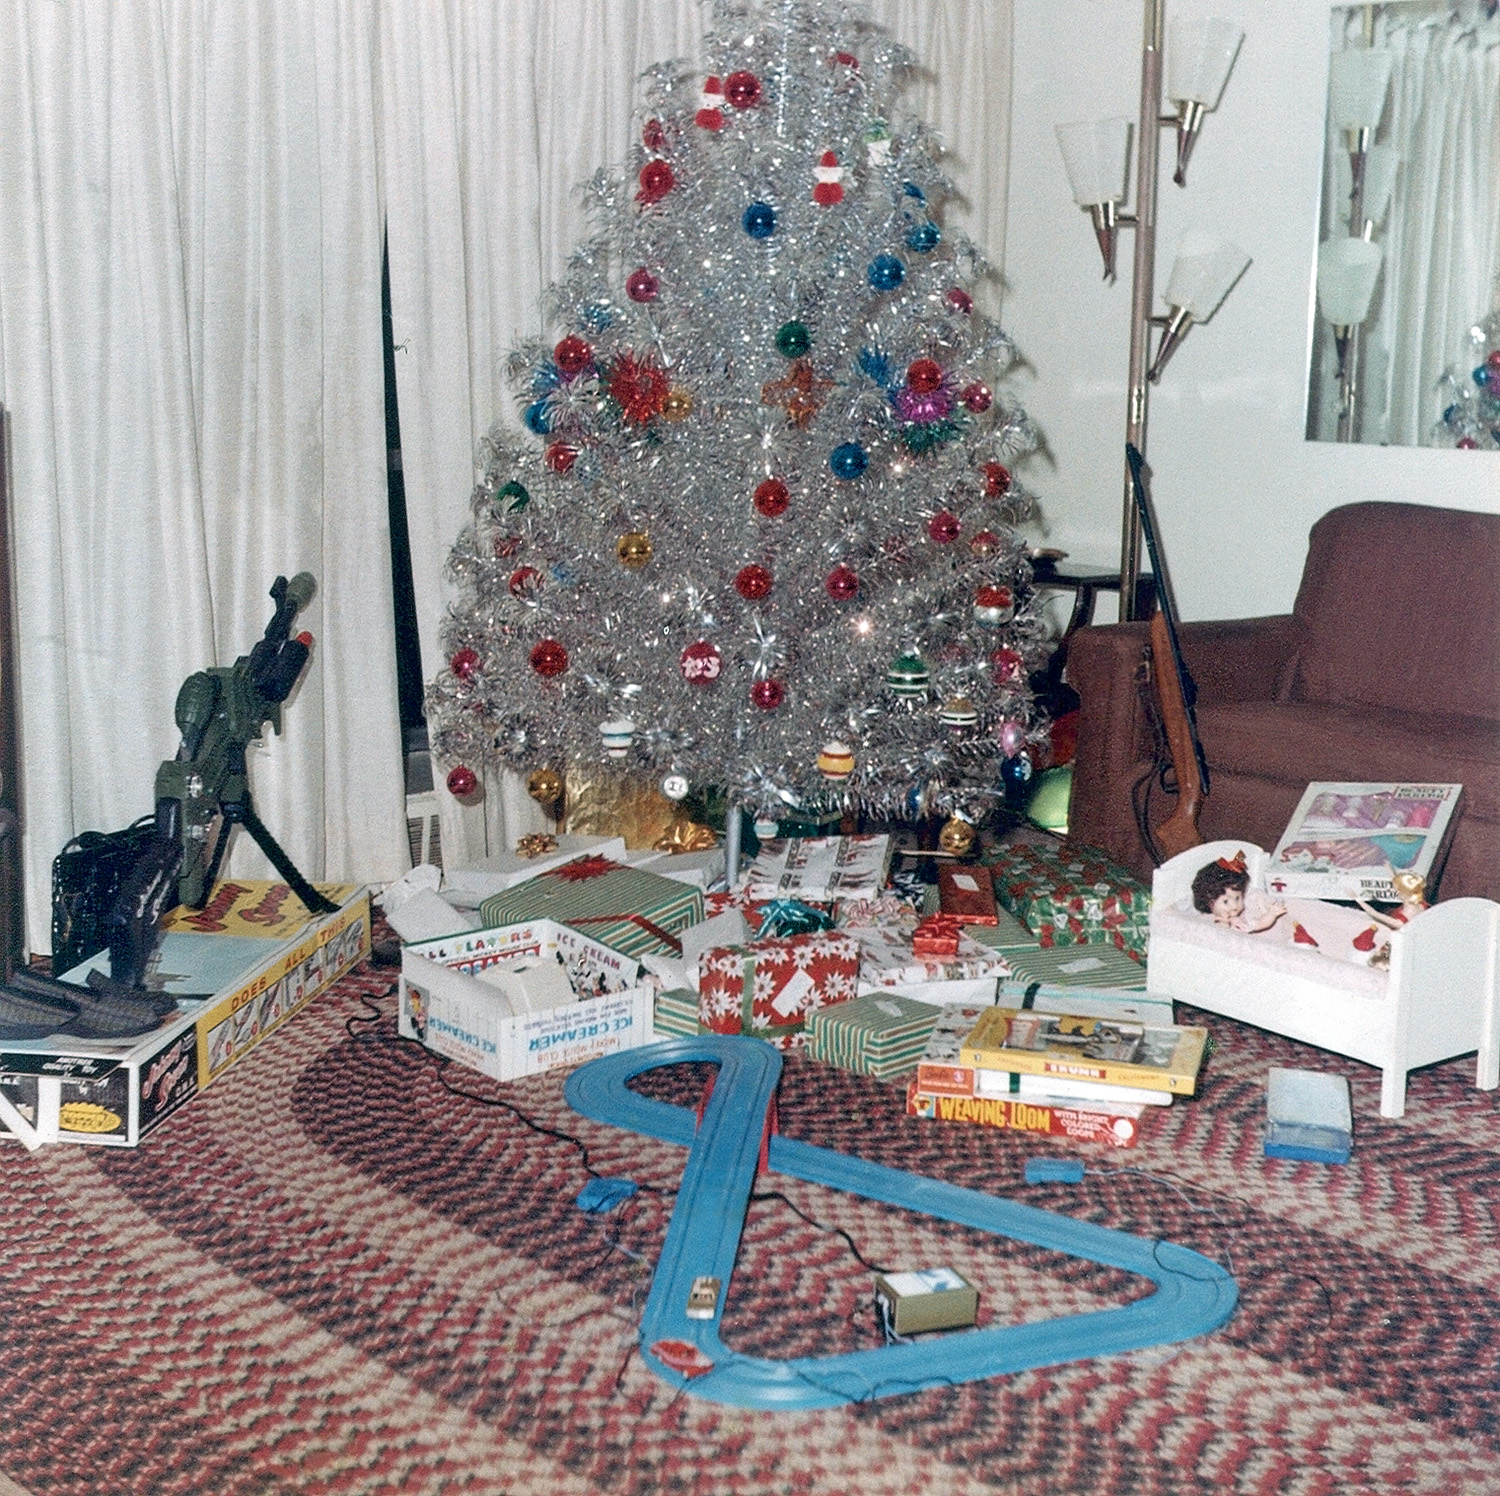 It’s Christmas 1964: snow lying heavily on the ground, gifts under the tree and the house redolent with the evocative aroma of … aluminum. I believe my parents agreed to buy this tree so that Mother wouldn’t be vacuuming up pine needles until Easter.  I still have this tree, (and the color wheel) although it’s not quite as fluffy as shown here.  My parents had a policy that the un-wrapped gifts came from Santa, so this photo must have been taken on Christmas Eve.  Left to right, slippers for Father, a Johnny Seven for one of my brothers and a rudimentary ice-cream maker that came in handy during the Summer months.  On the right is a BB gun that was confiscated by Father later, but my older brother probably consoled himself playing with the slot-car track. Yes, it was a pretty good life in my town of Undisclosed Location.  Oh, me? I got the dolls and cradle shown on the right.

Merry Christmas to my fellow Shorpy-ites. View full size.